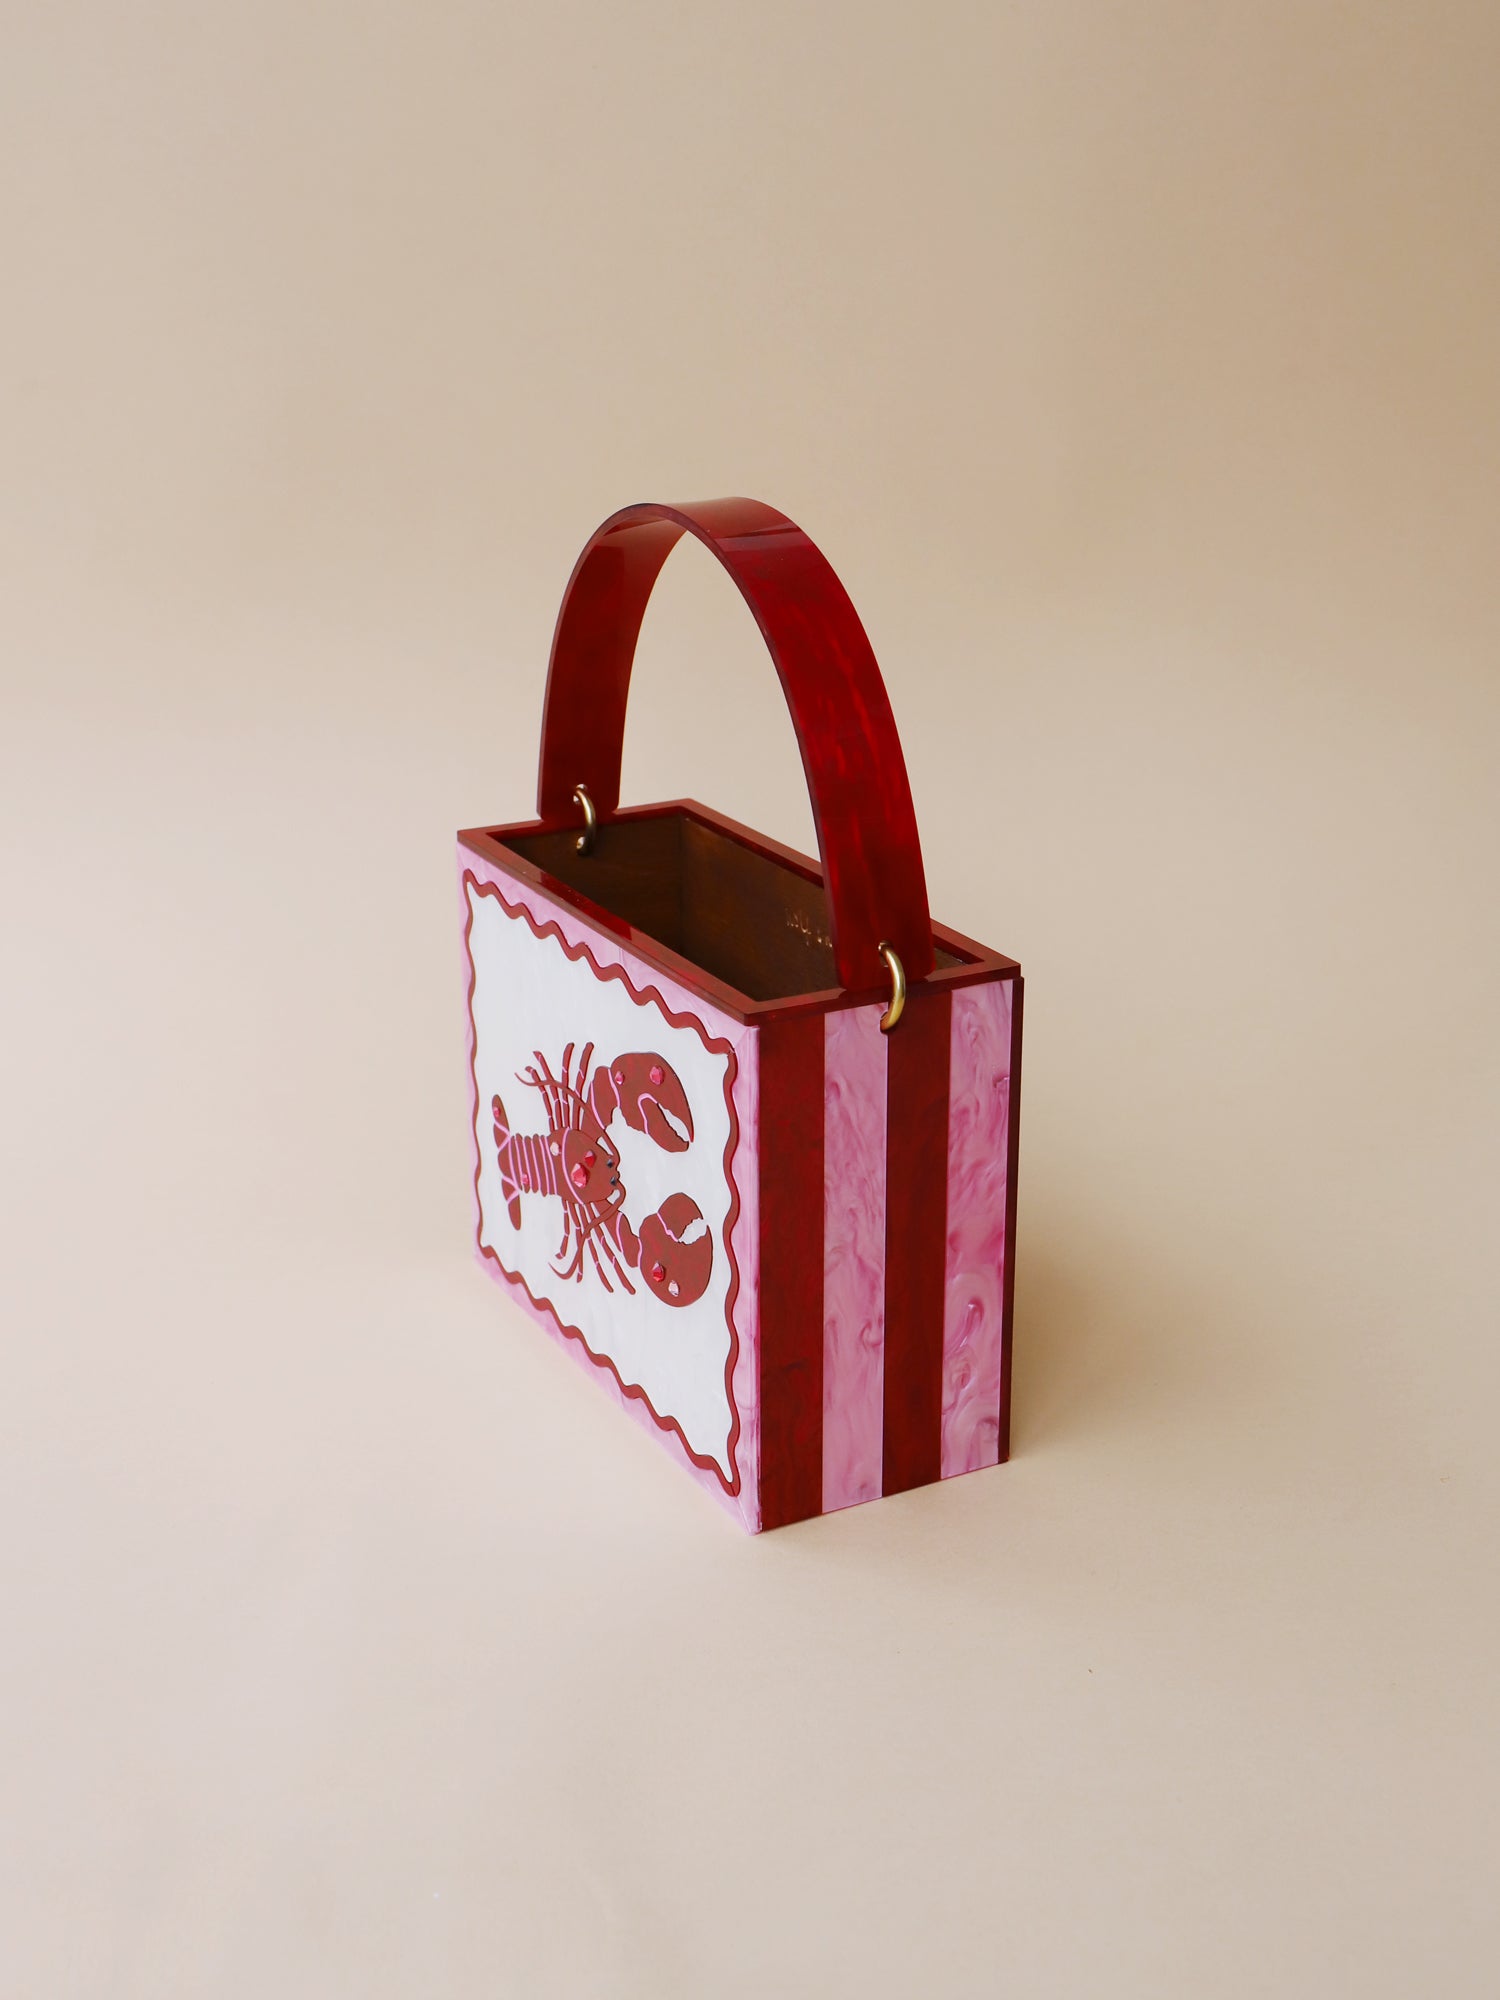 Red & pink lobster bag. Made from acrylic and wood. Handmade in the UK by Wolf & Moon. 